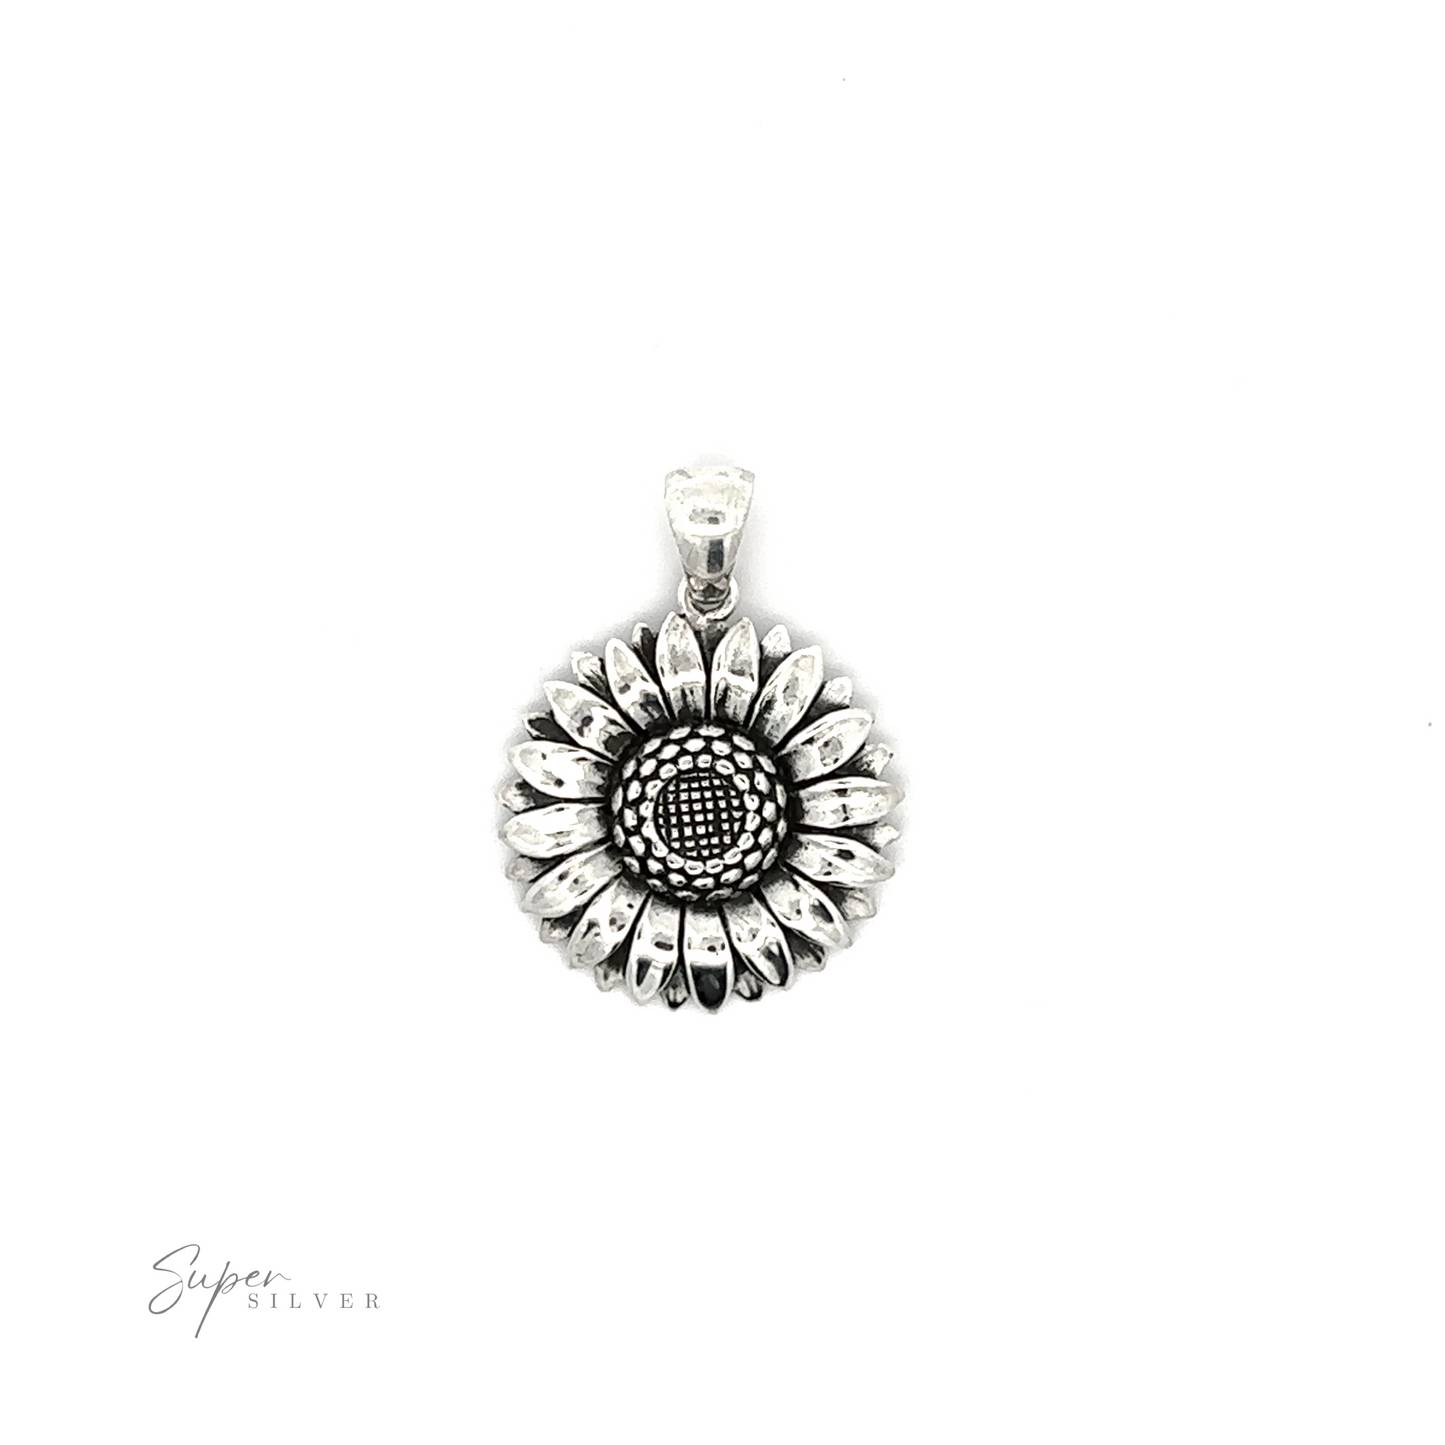 
                  
                    A Silver Sunflower Pendant with detailed petals and an oxidized finish, displayed against a white background with the logo "super silver" at the bottom.
                  
                